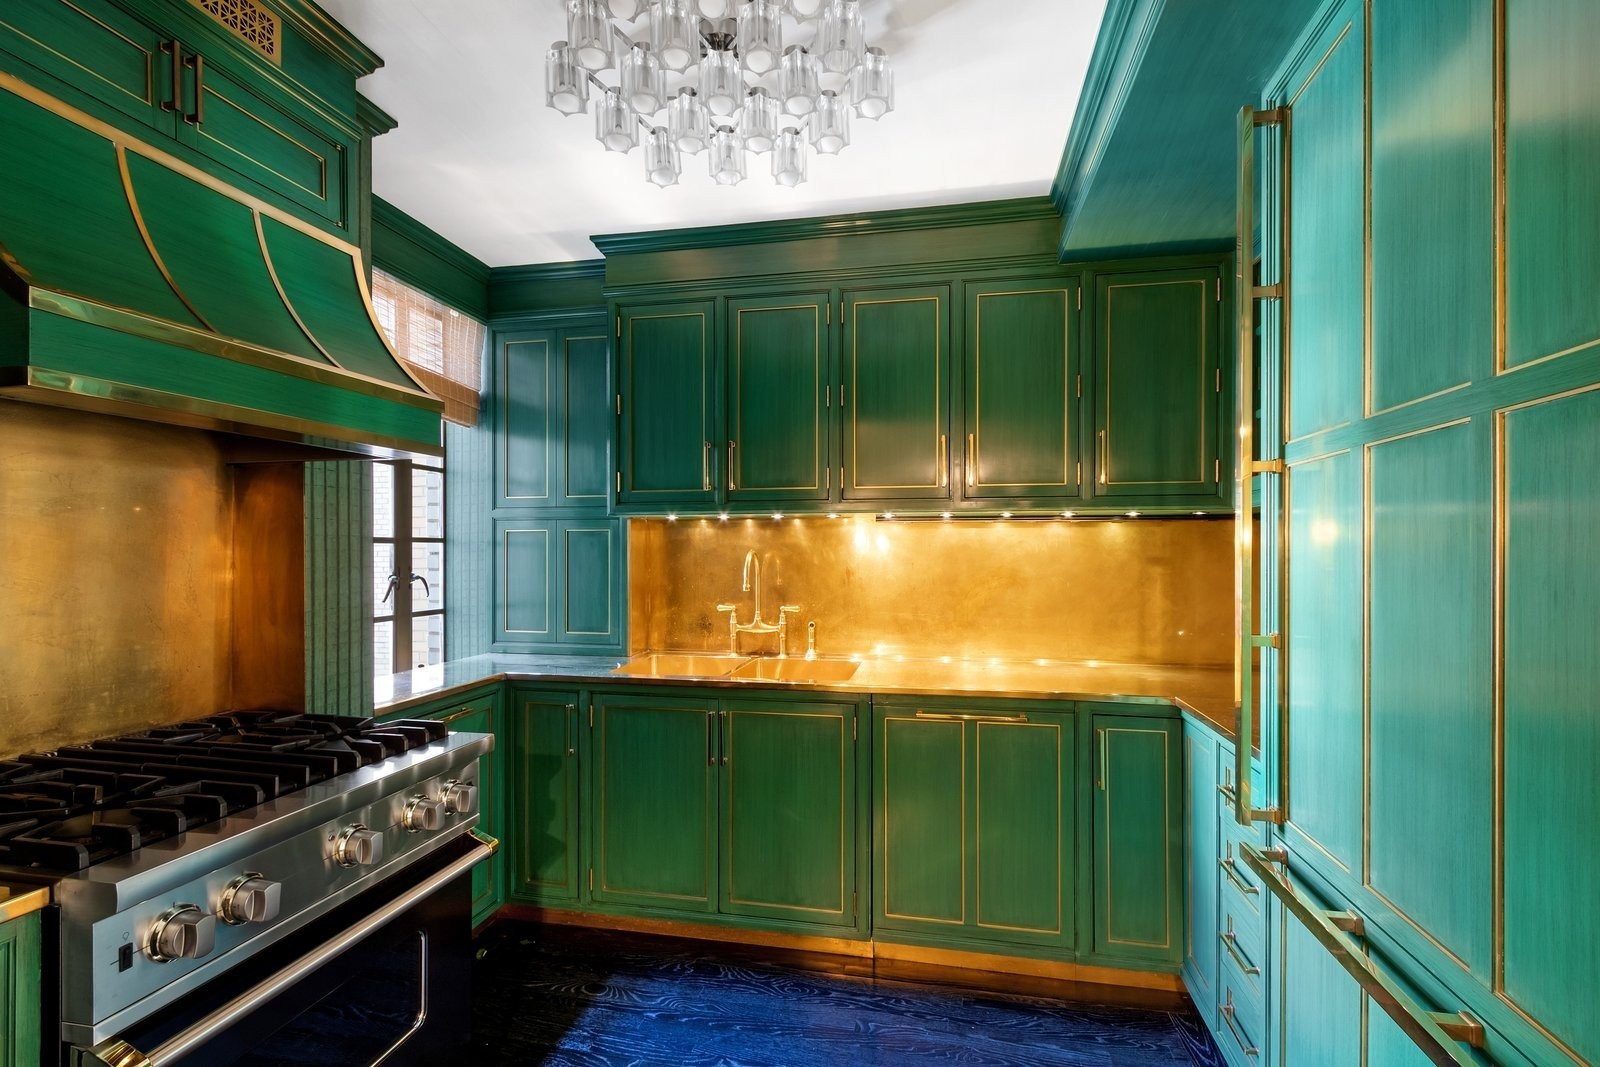 the-chefs-kitchen-is-fitted-with-a-miele-dishwasher-a-sub-zero-refrigeratorfreezer-a-viking-range-and-a-water-filtration-system-the-emerald-cabinets-are-accented-by-the-brass-backsplash-hardware-and-counters.jpg